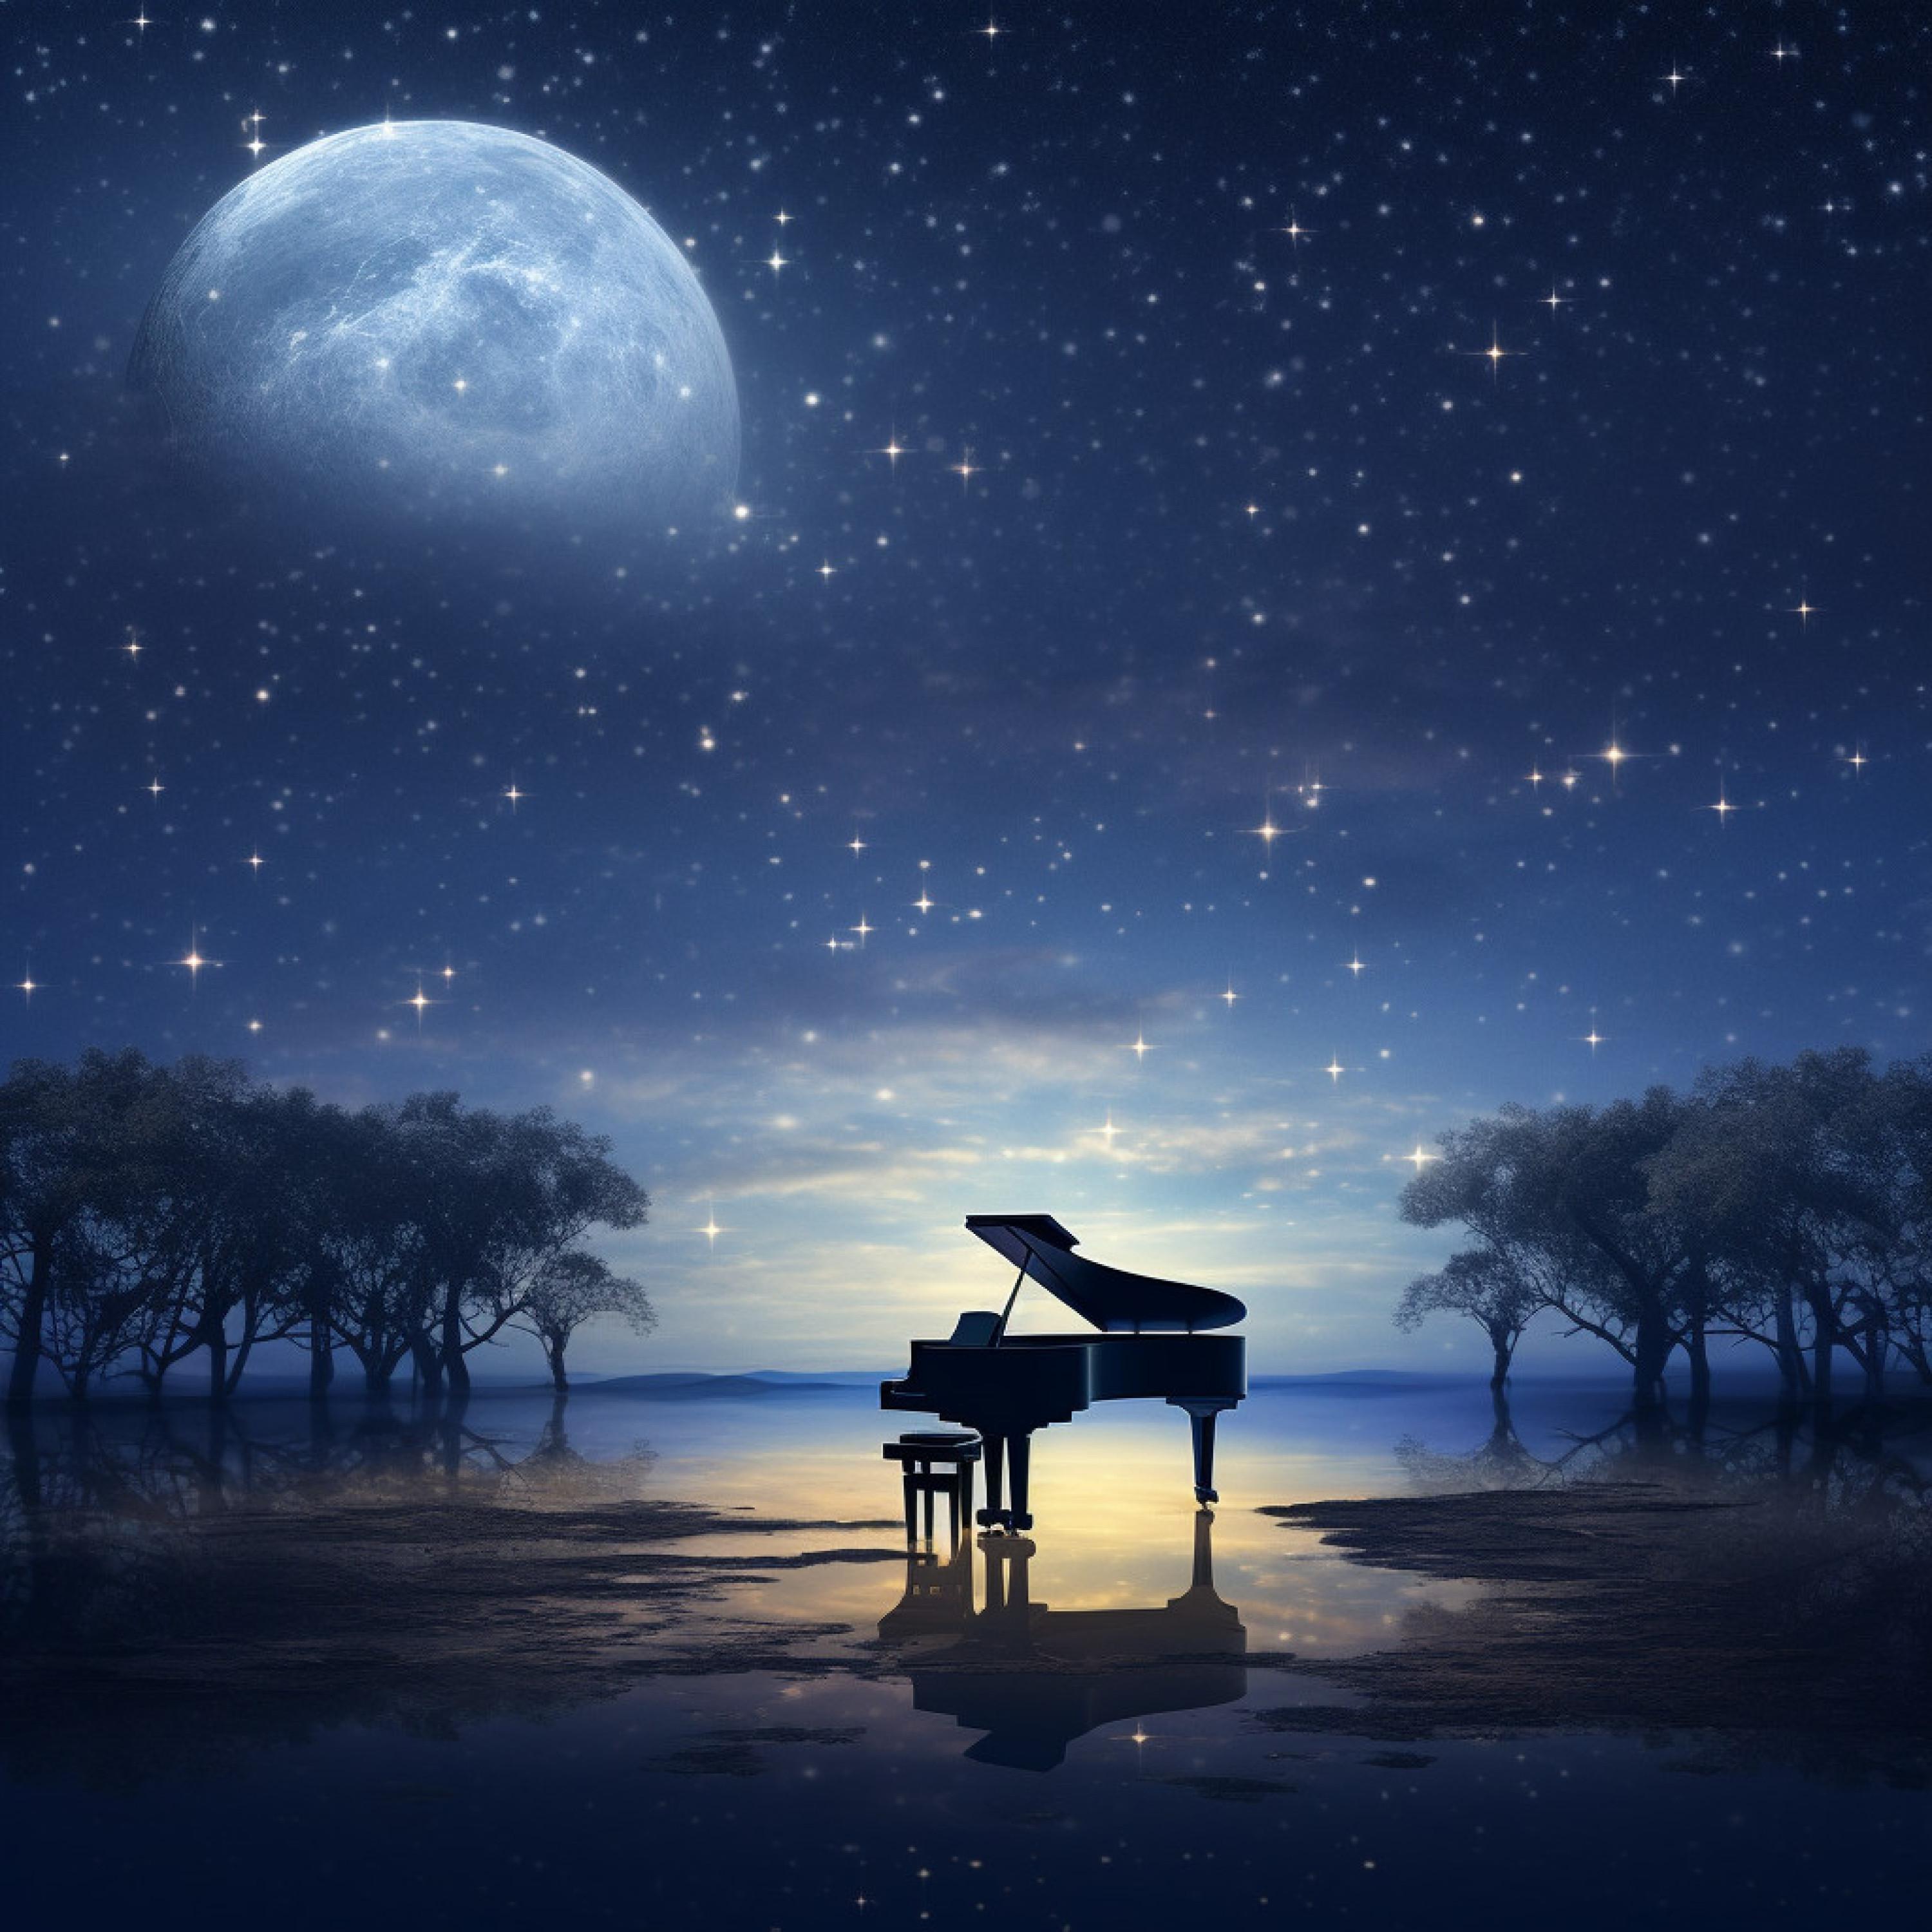 Piano and Ocean Waves Experience - Piano Under Moonlit Skies